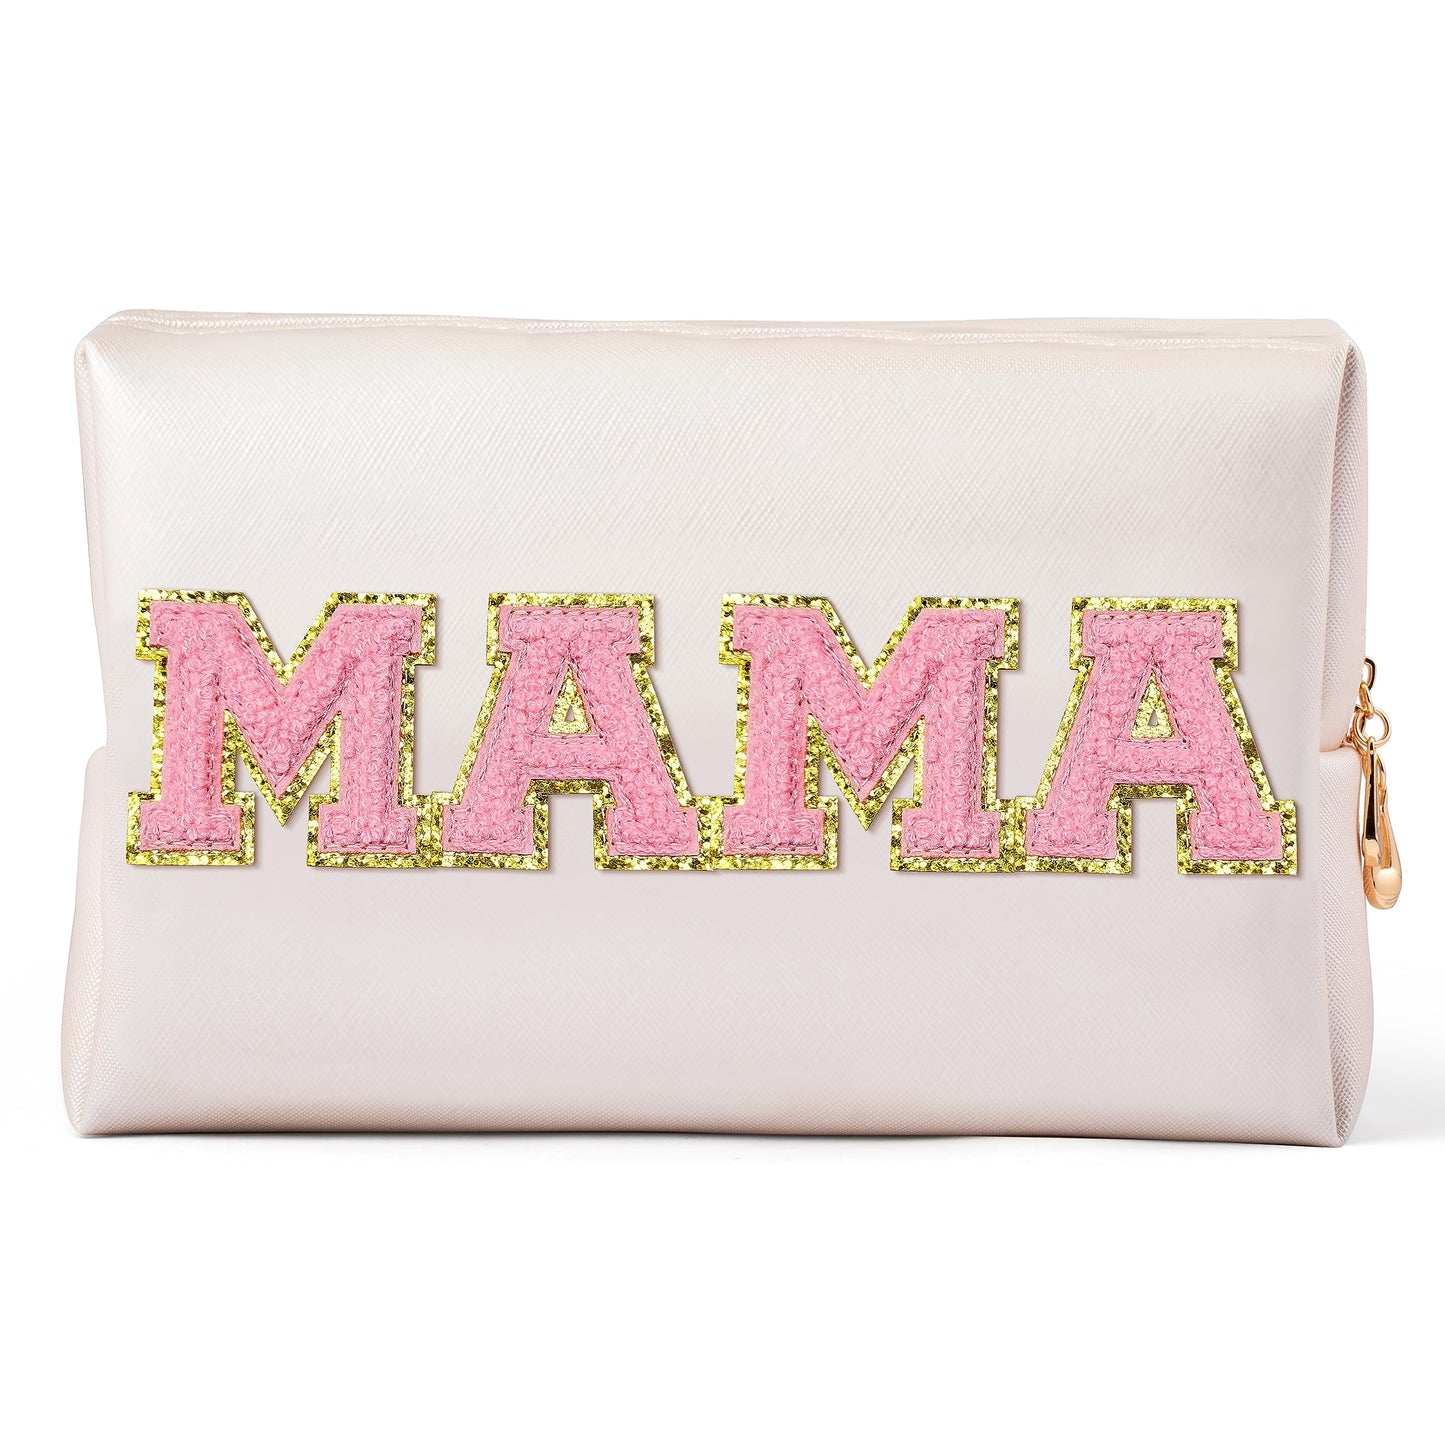 Y1tvei Preppy Patch Extra Large Mama Varsity Letter Makeup Bag Pink Chenille Letter PU Leather Waterproof Portable Cosmetic Toiletry Bag Zipper Organizer Mama to Be Mother's Day Birthday Gift for Mom